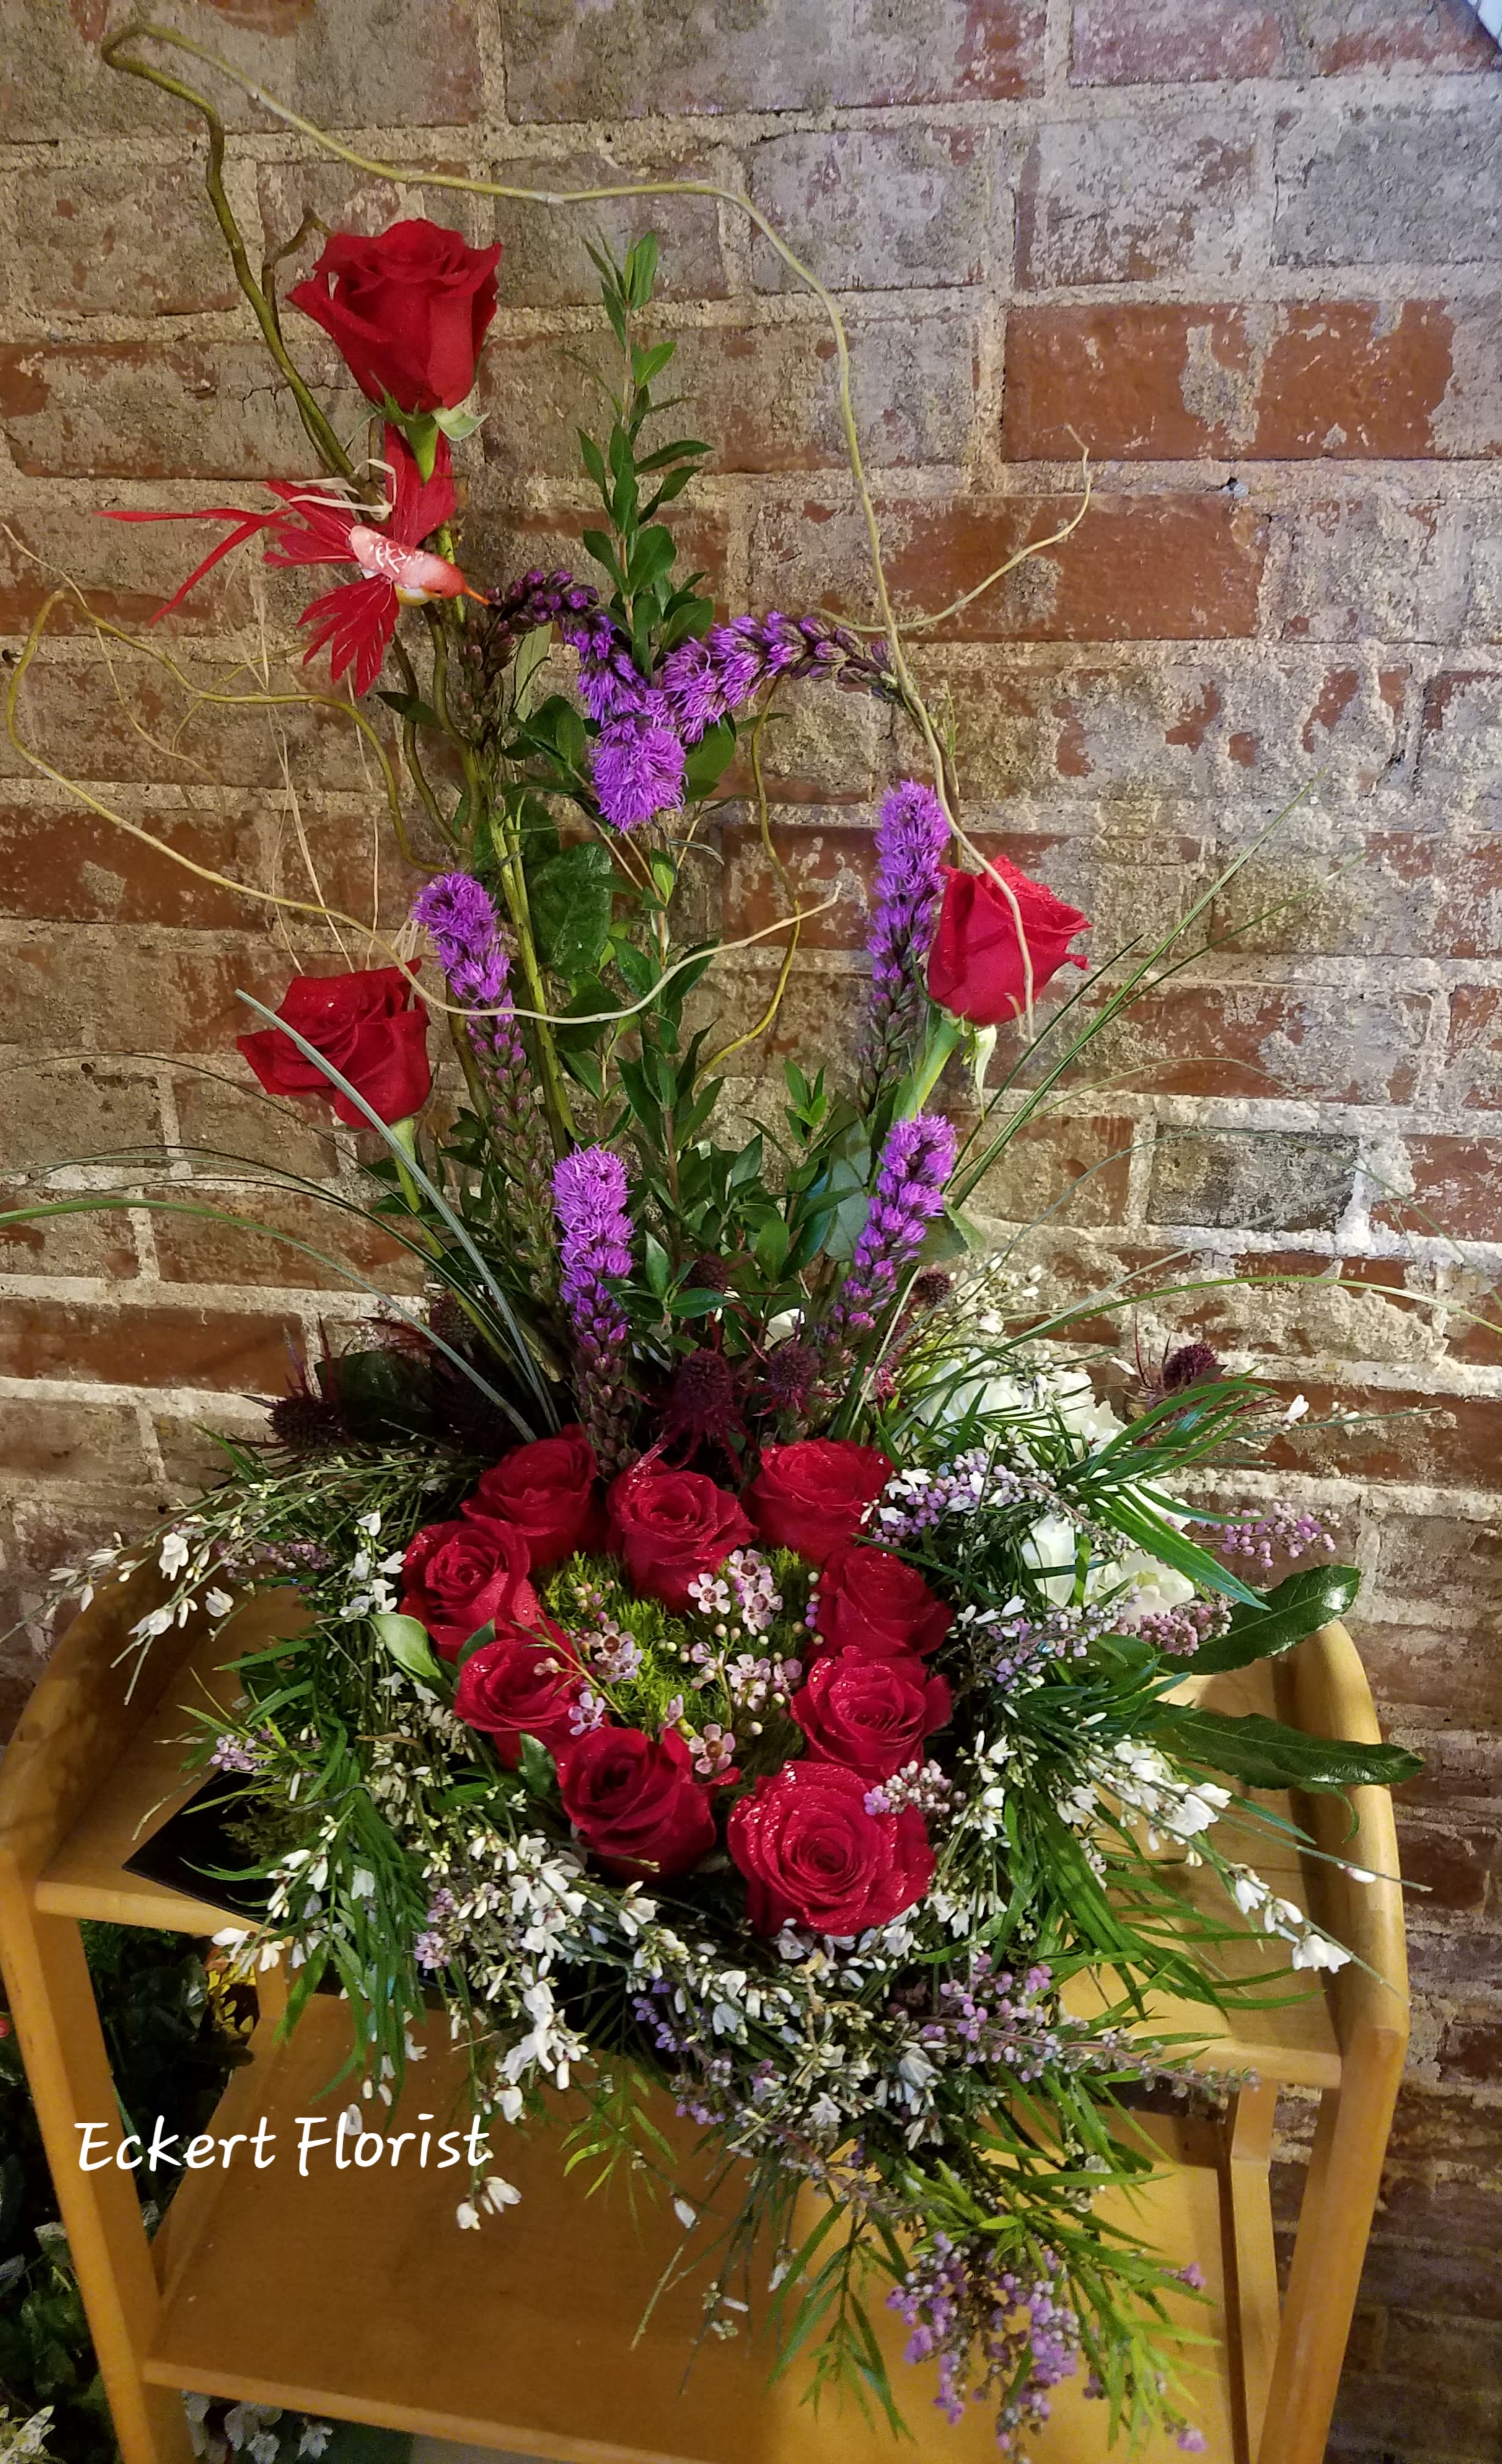 Eckert Florist's Forever Love Bouquet - This gorgeous alternative style arrangement of a dozen roses just overflows with love showing them how much you care. *Local delivery only